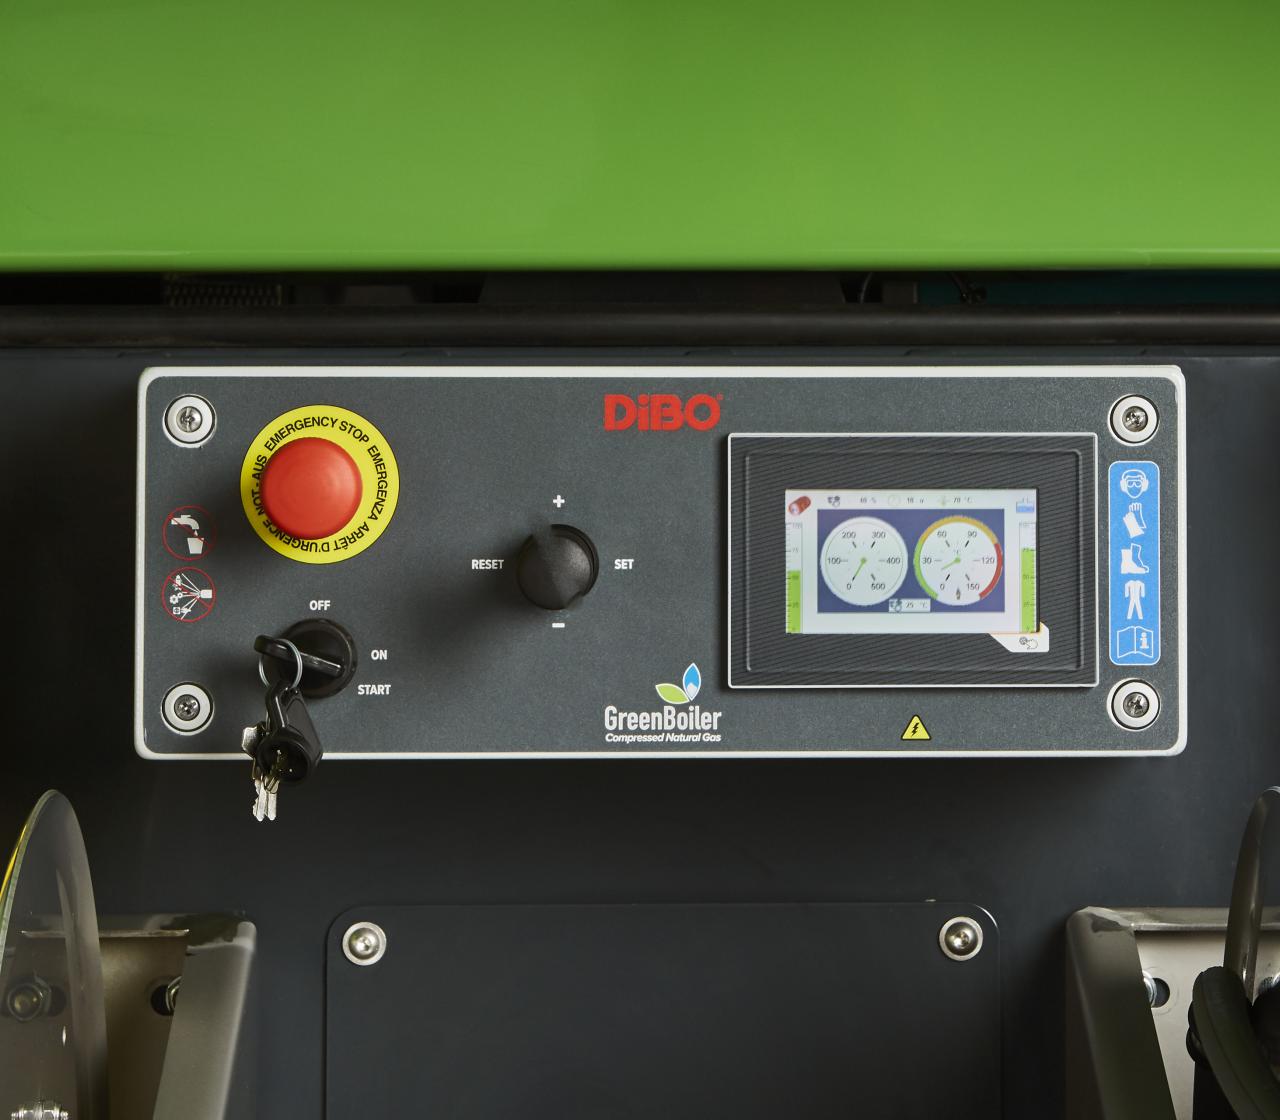 Digital control for the DiBO trailers with joystick for convenient operation with gloves